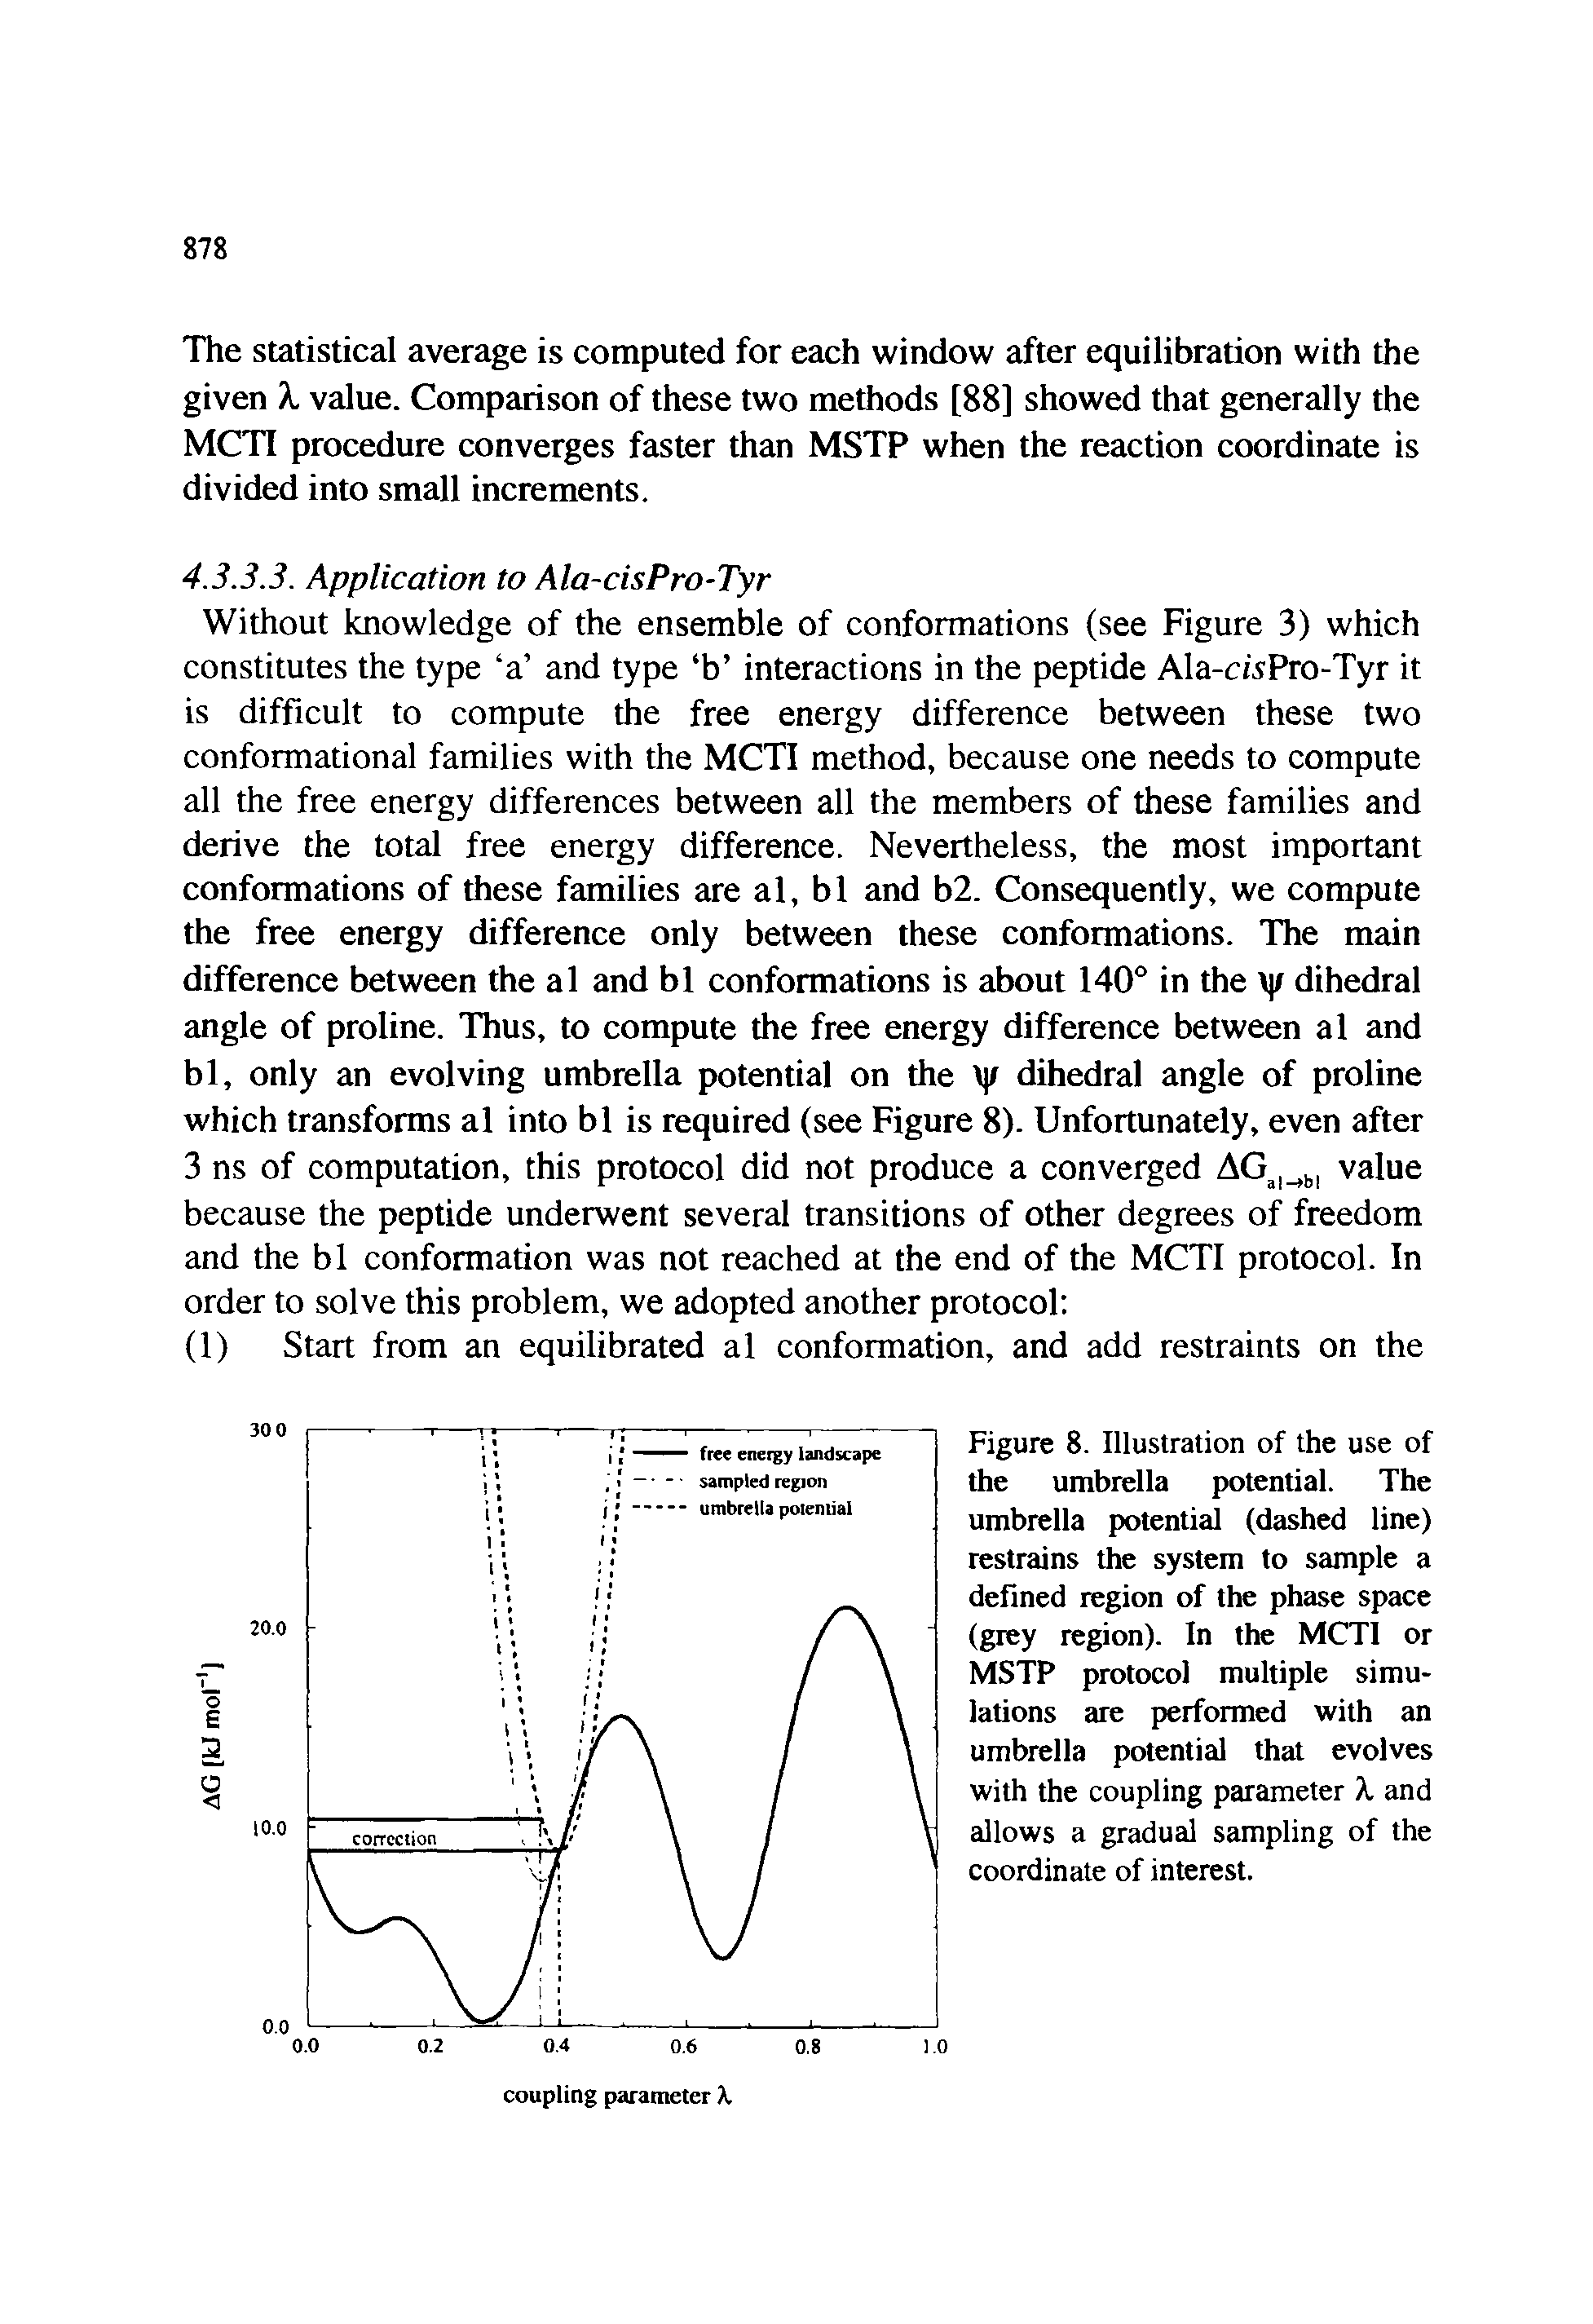 Figure 8. Illustration of the use of the umbrella potential. The umbrella potential (dashed line) restrains the system to sample a defined region of the phase space (grey region). In the MCTI or MSTP protocol multiple simulations are performed with an umbrella potential that evolves with the coupling parameter X and allows a gradual sampling of the coordinate of interest.